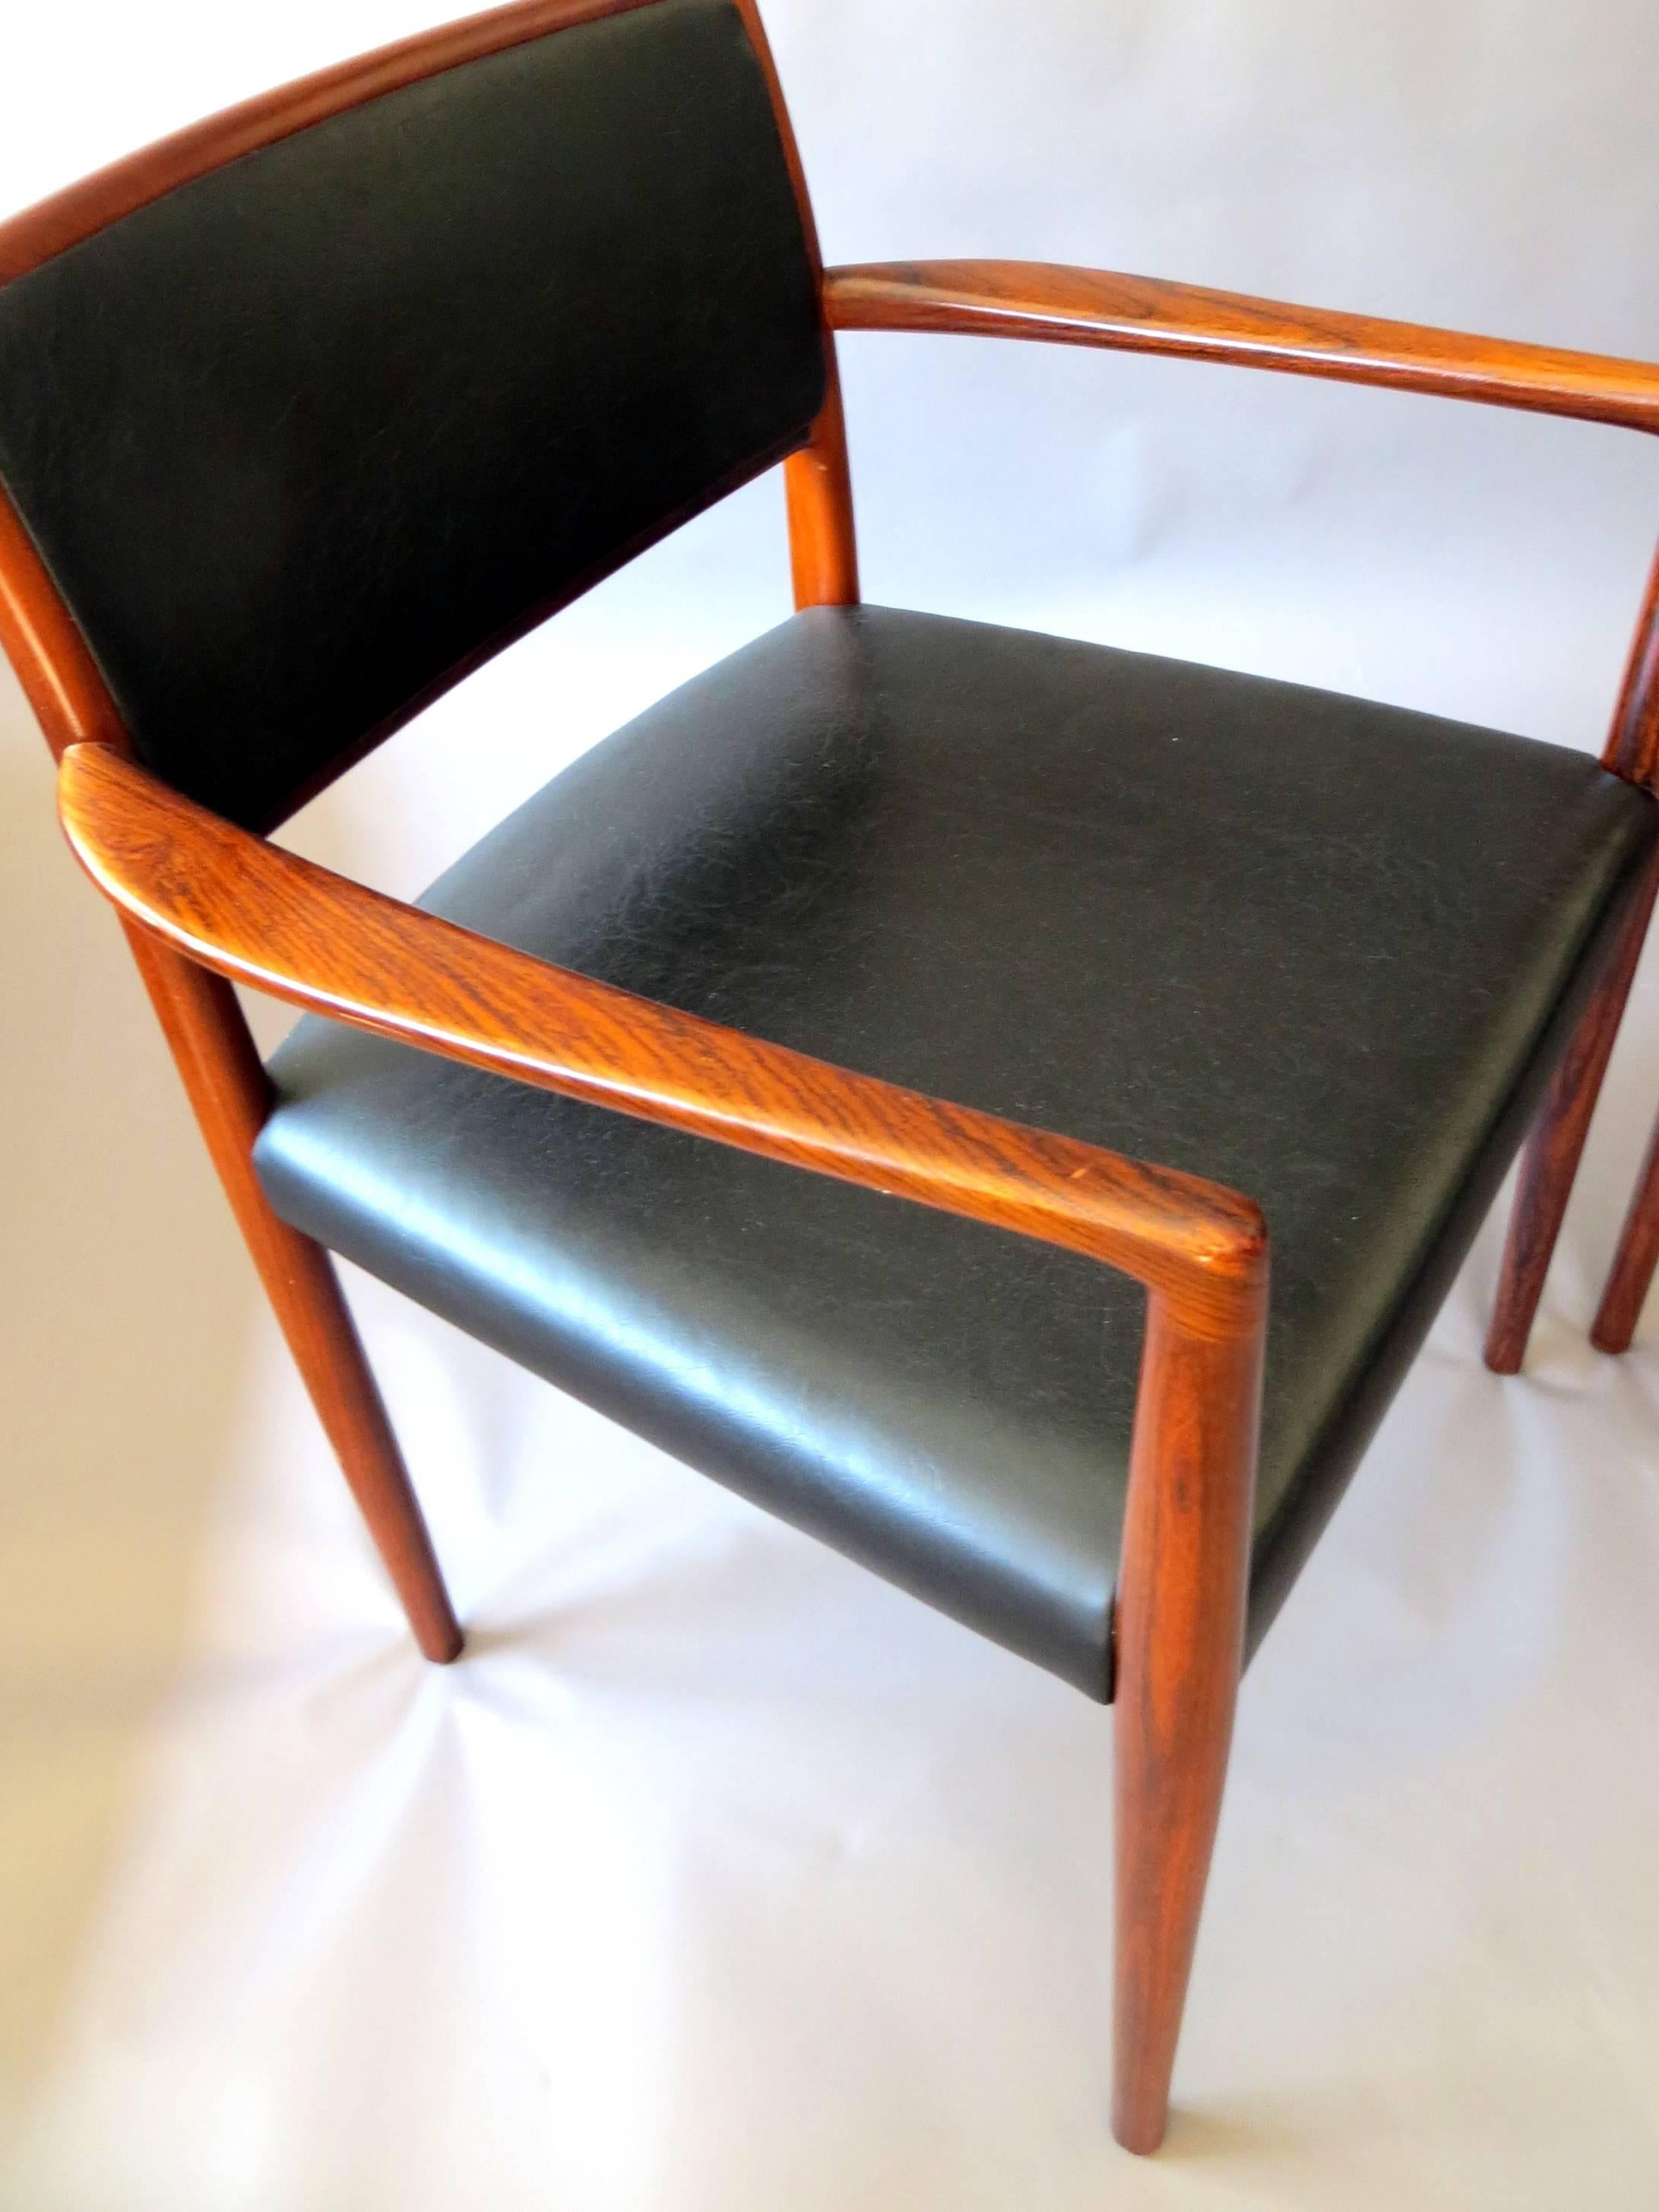 Danish Mid-Century Modern Rosewood and Leather Dining Chairs, Set of Two, 1960s For Sale 5